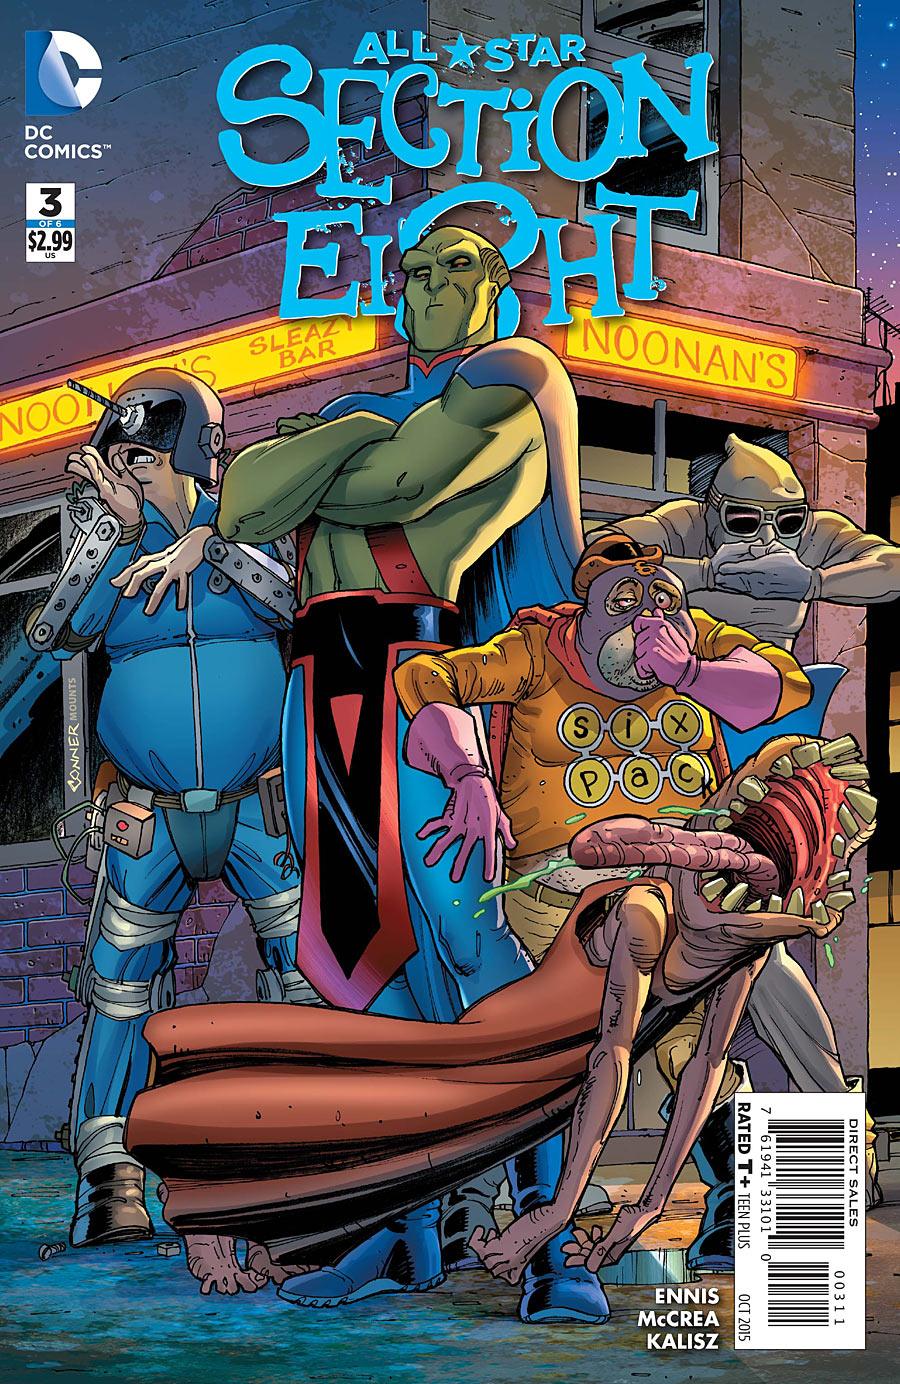 All Star Section Eight Vol. 1 #3